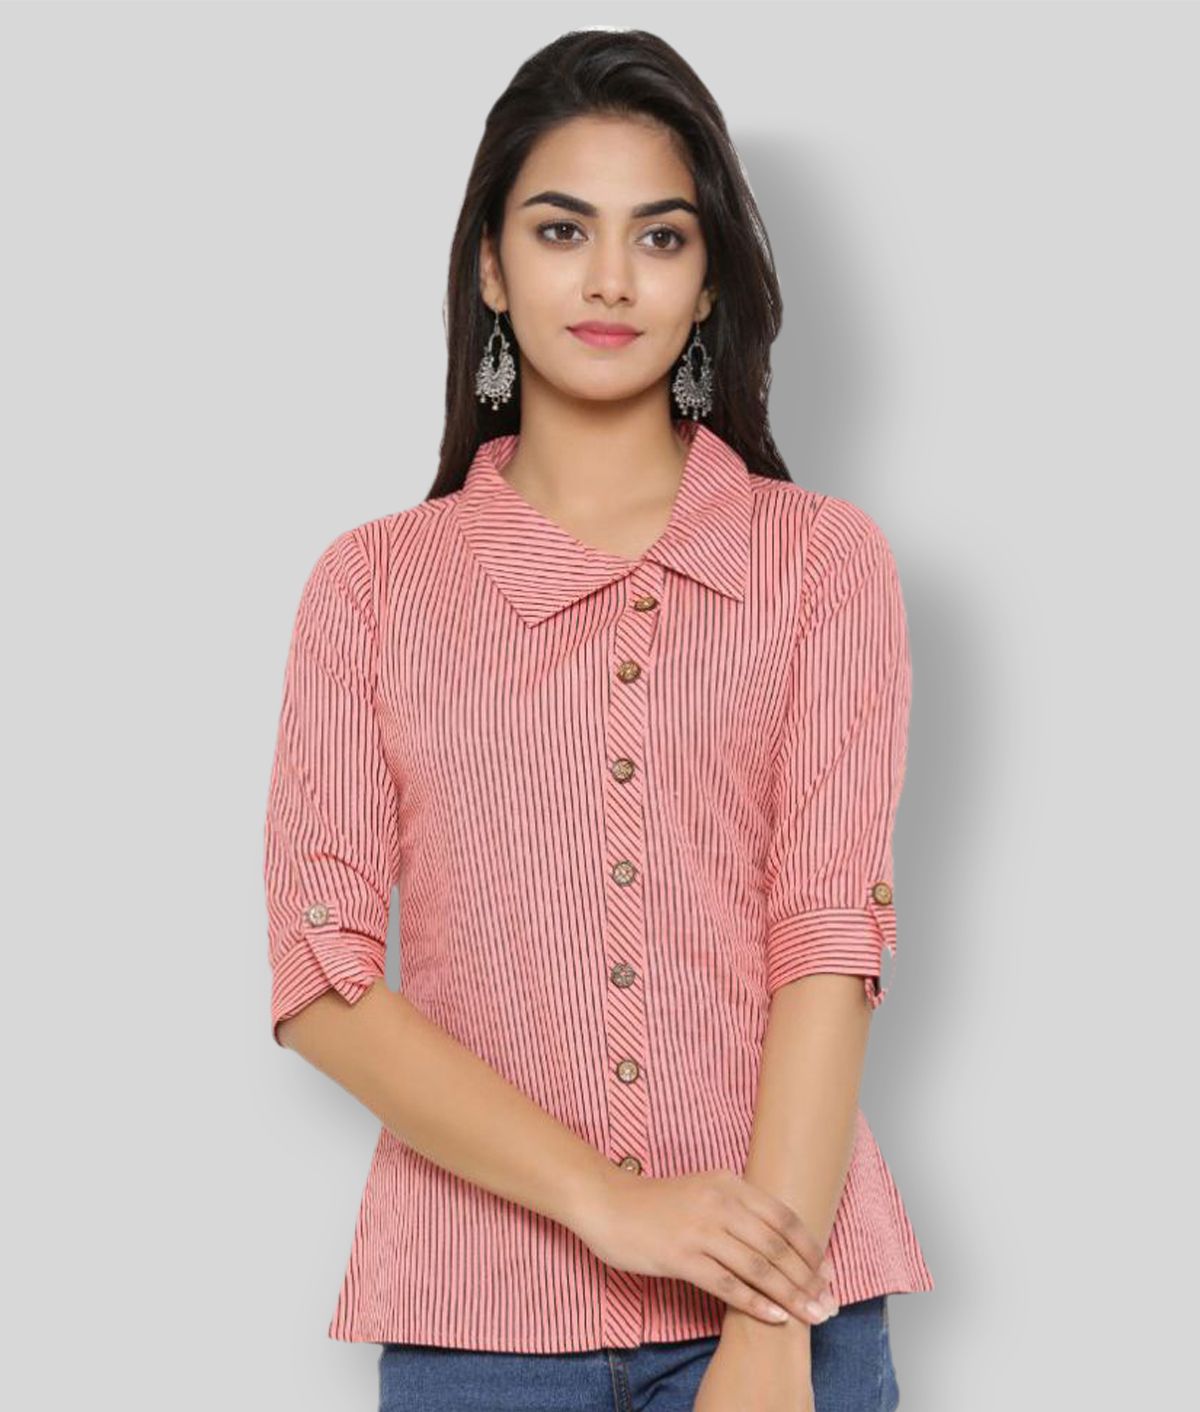     			Yash Gallery - Pink Cotton Blend Women's Shirt Style Top ( Pack of 1 )